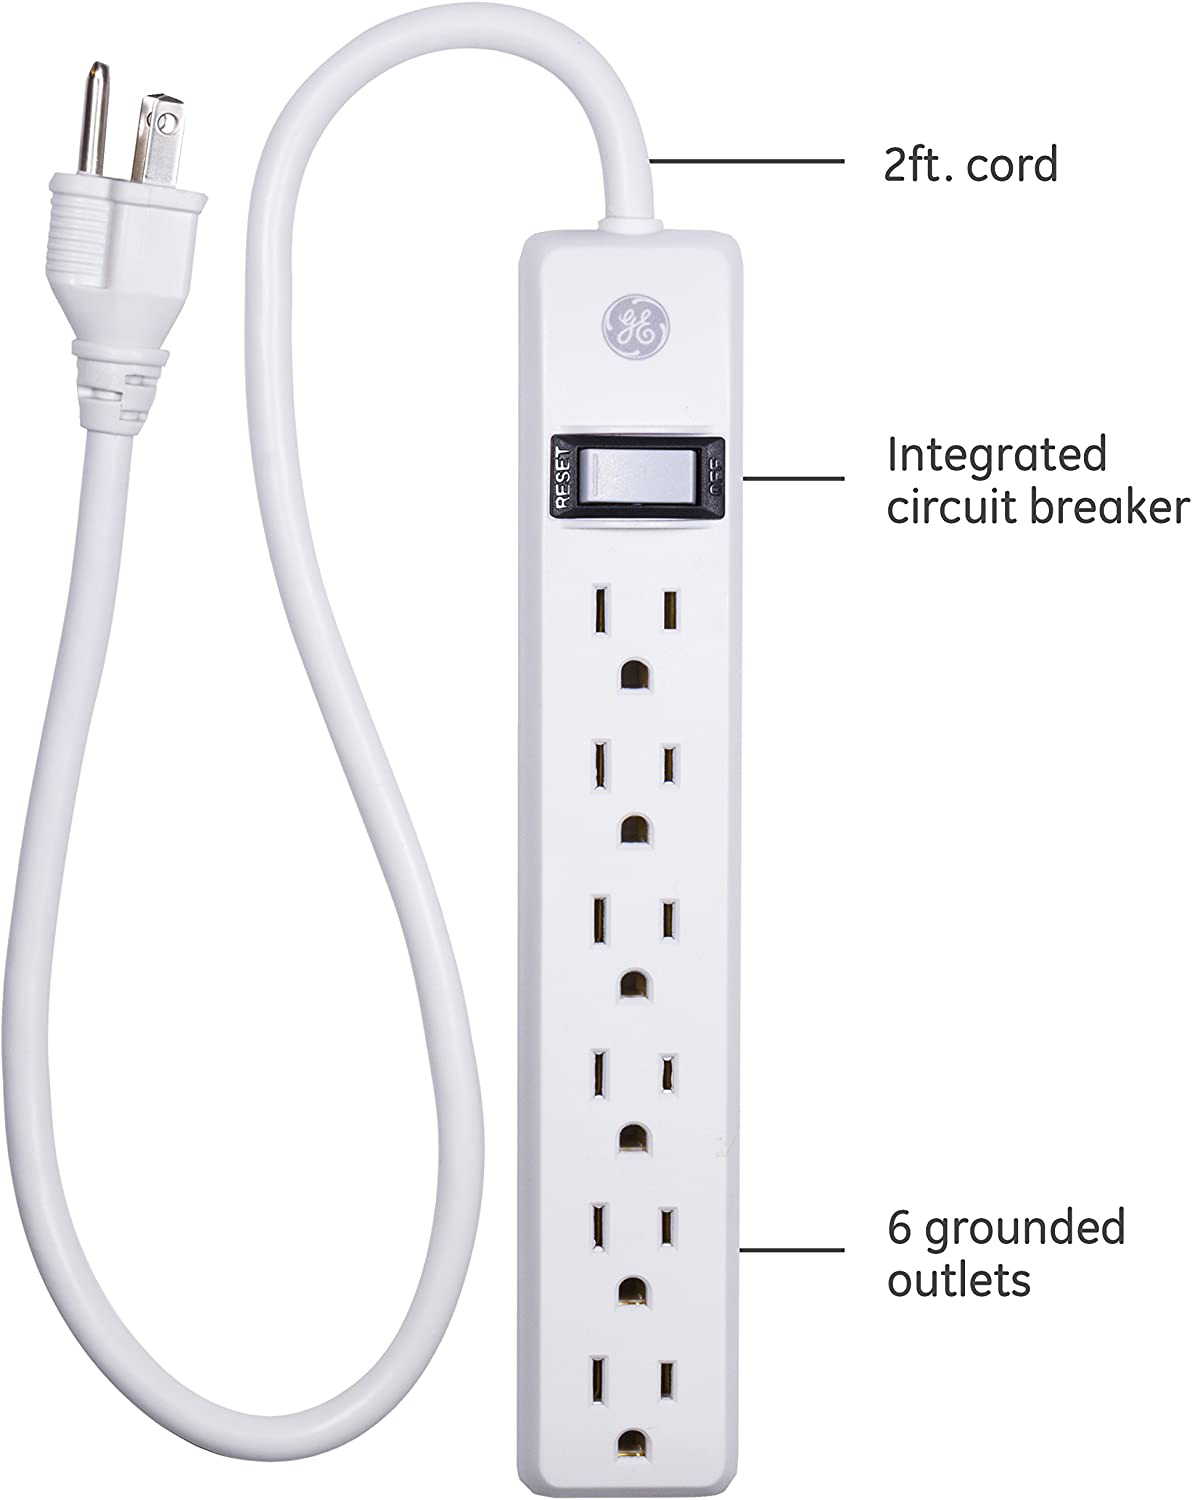 GE, White, 6 Outlet 2 Pack, 2 Ft Cord, Switched Power Strip, Integrated Circuit Breaker, Overload Protection, Wall Mountable, 3 Prong, UL Listed, 14833, Count